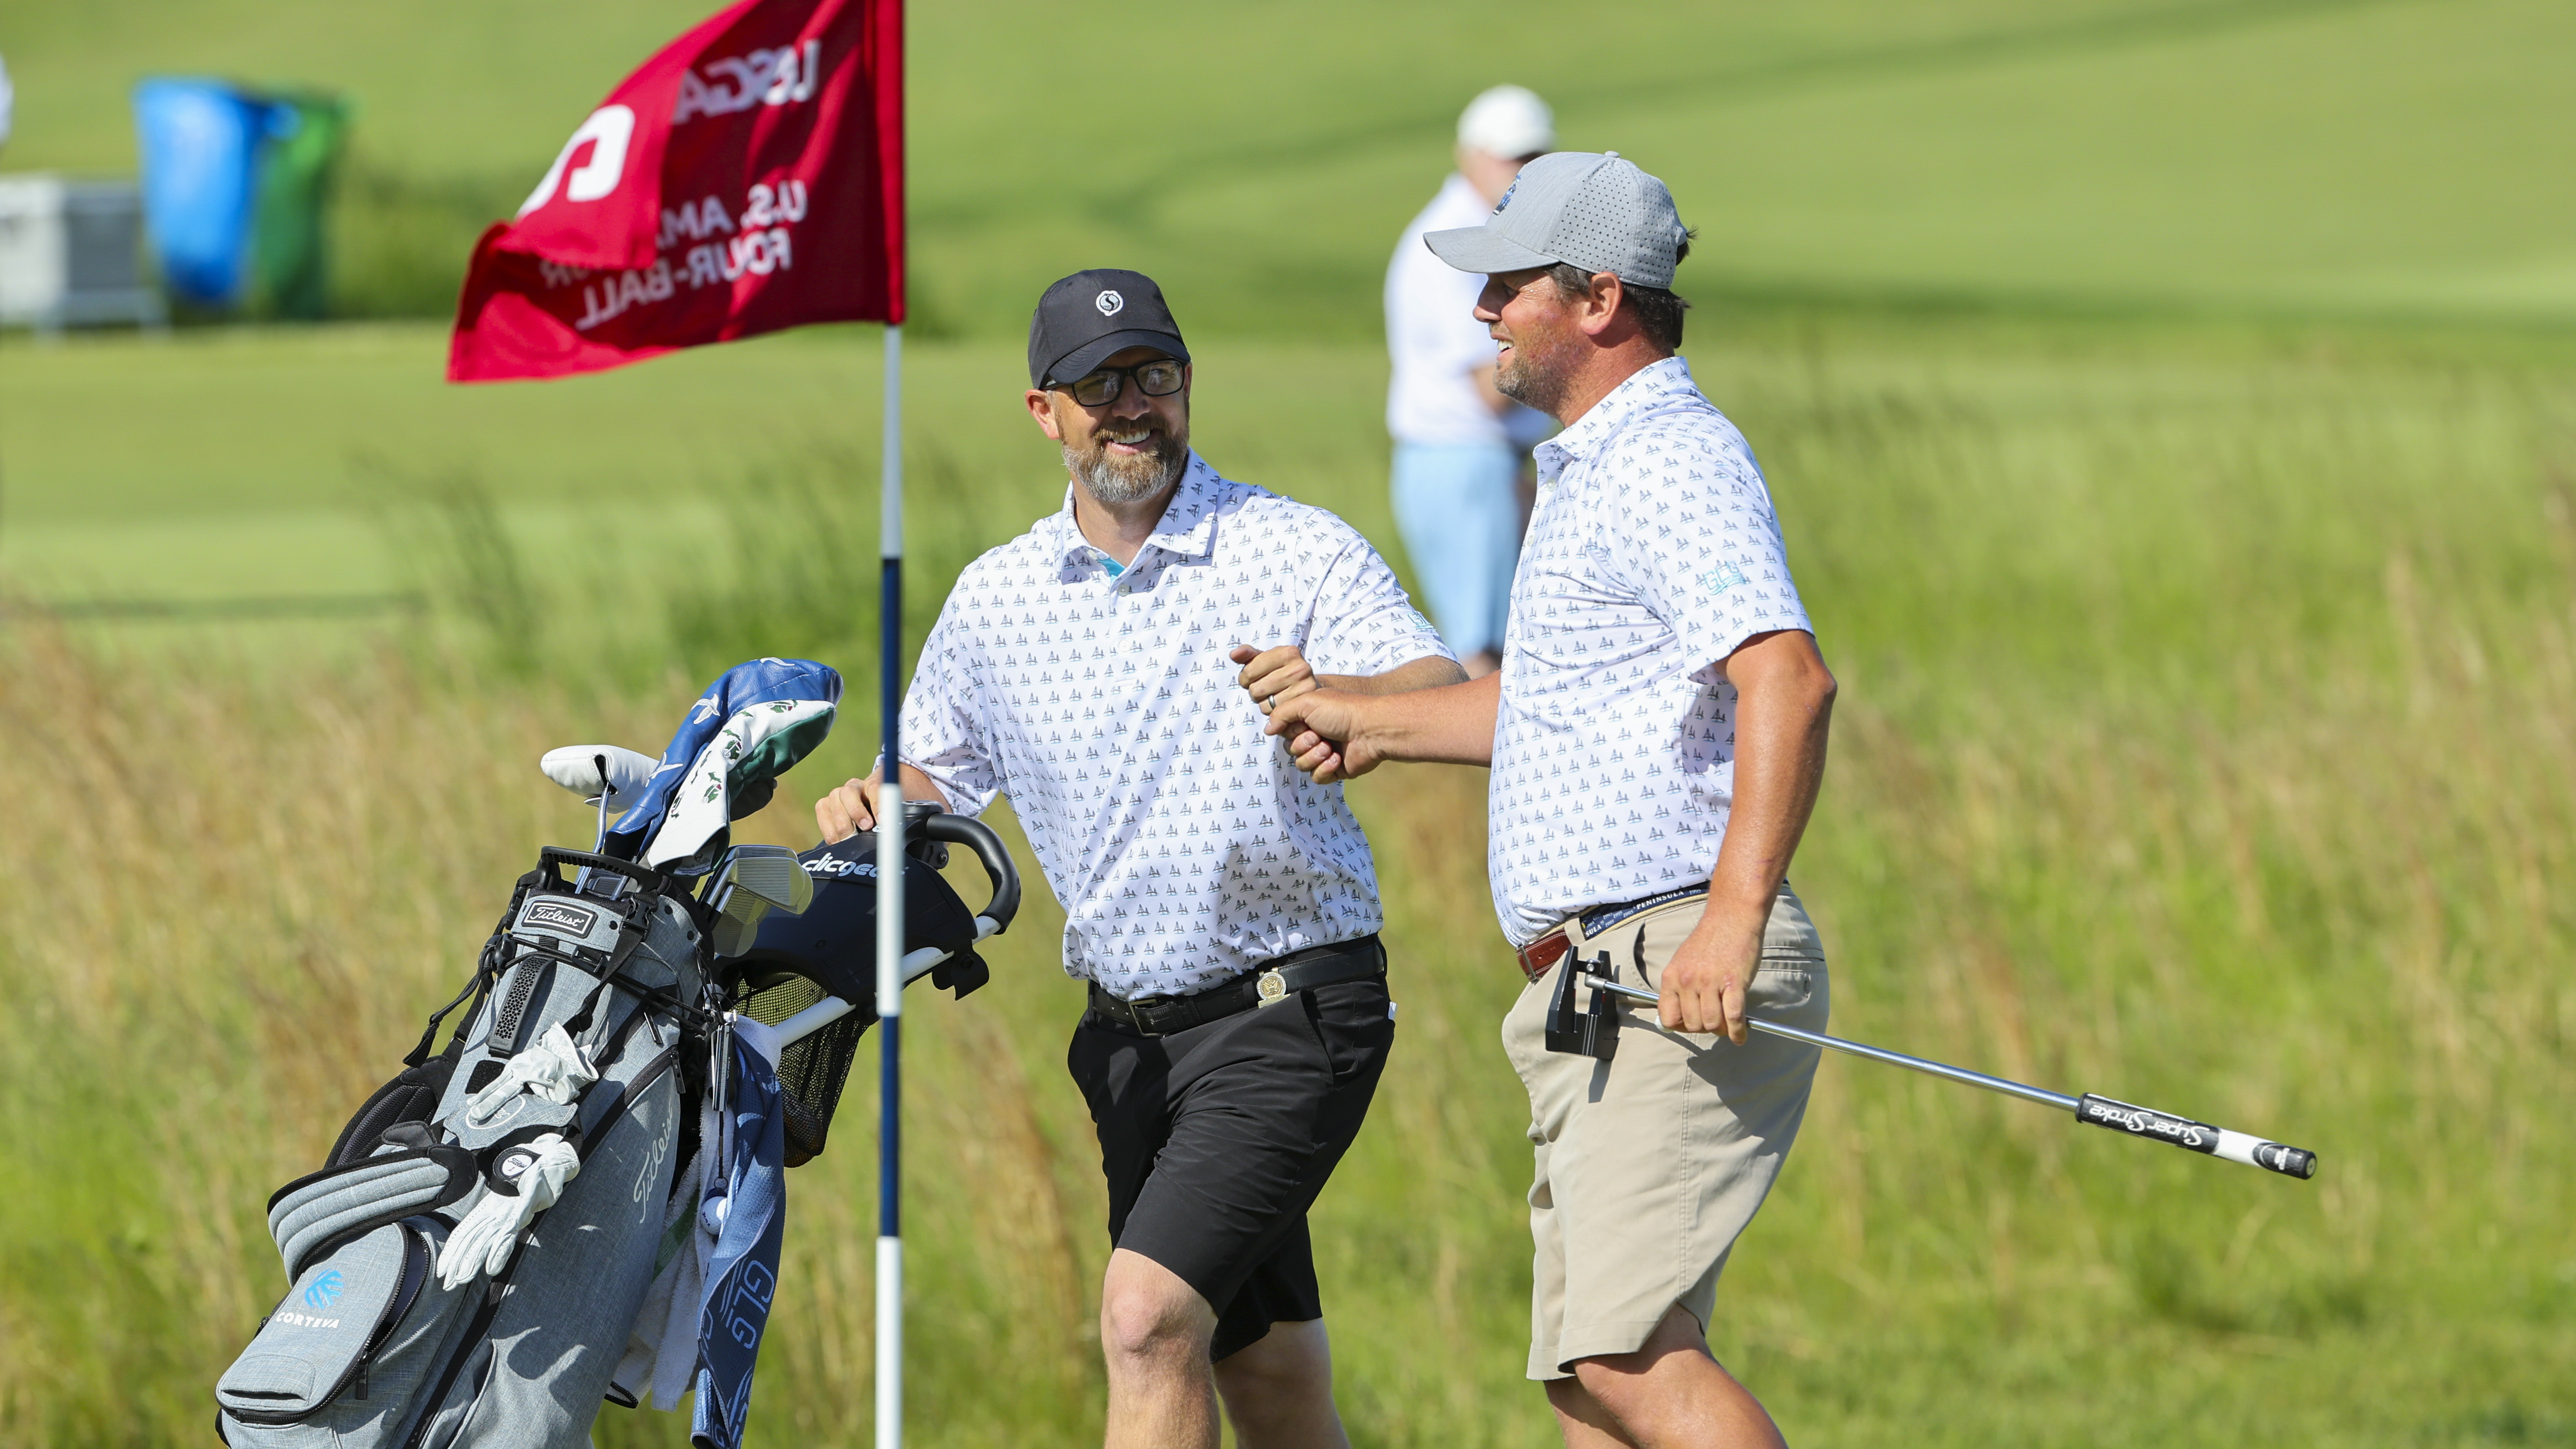 9th U.S. Amateur Four-Ball: Tuesday's Match-Play Scenes From Philadelphia Cricket Club